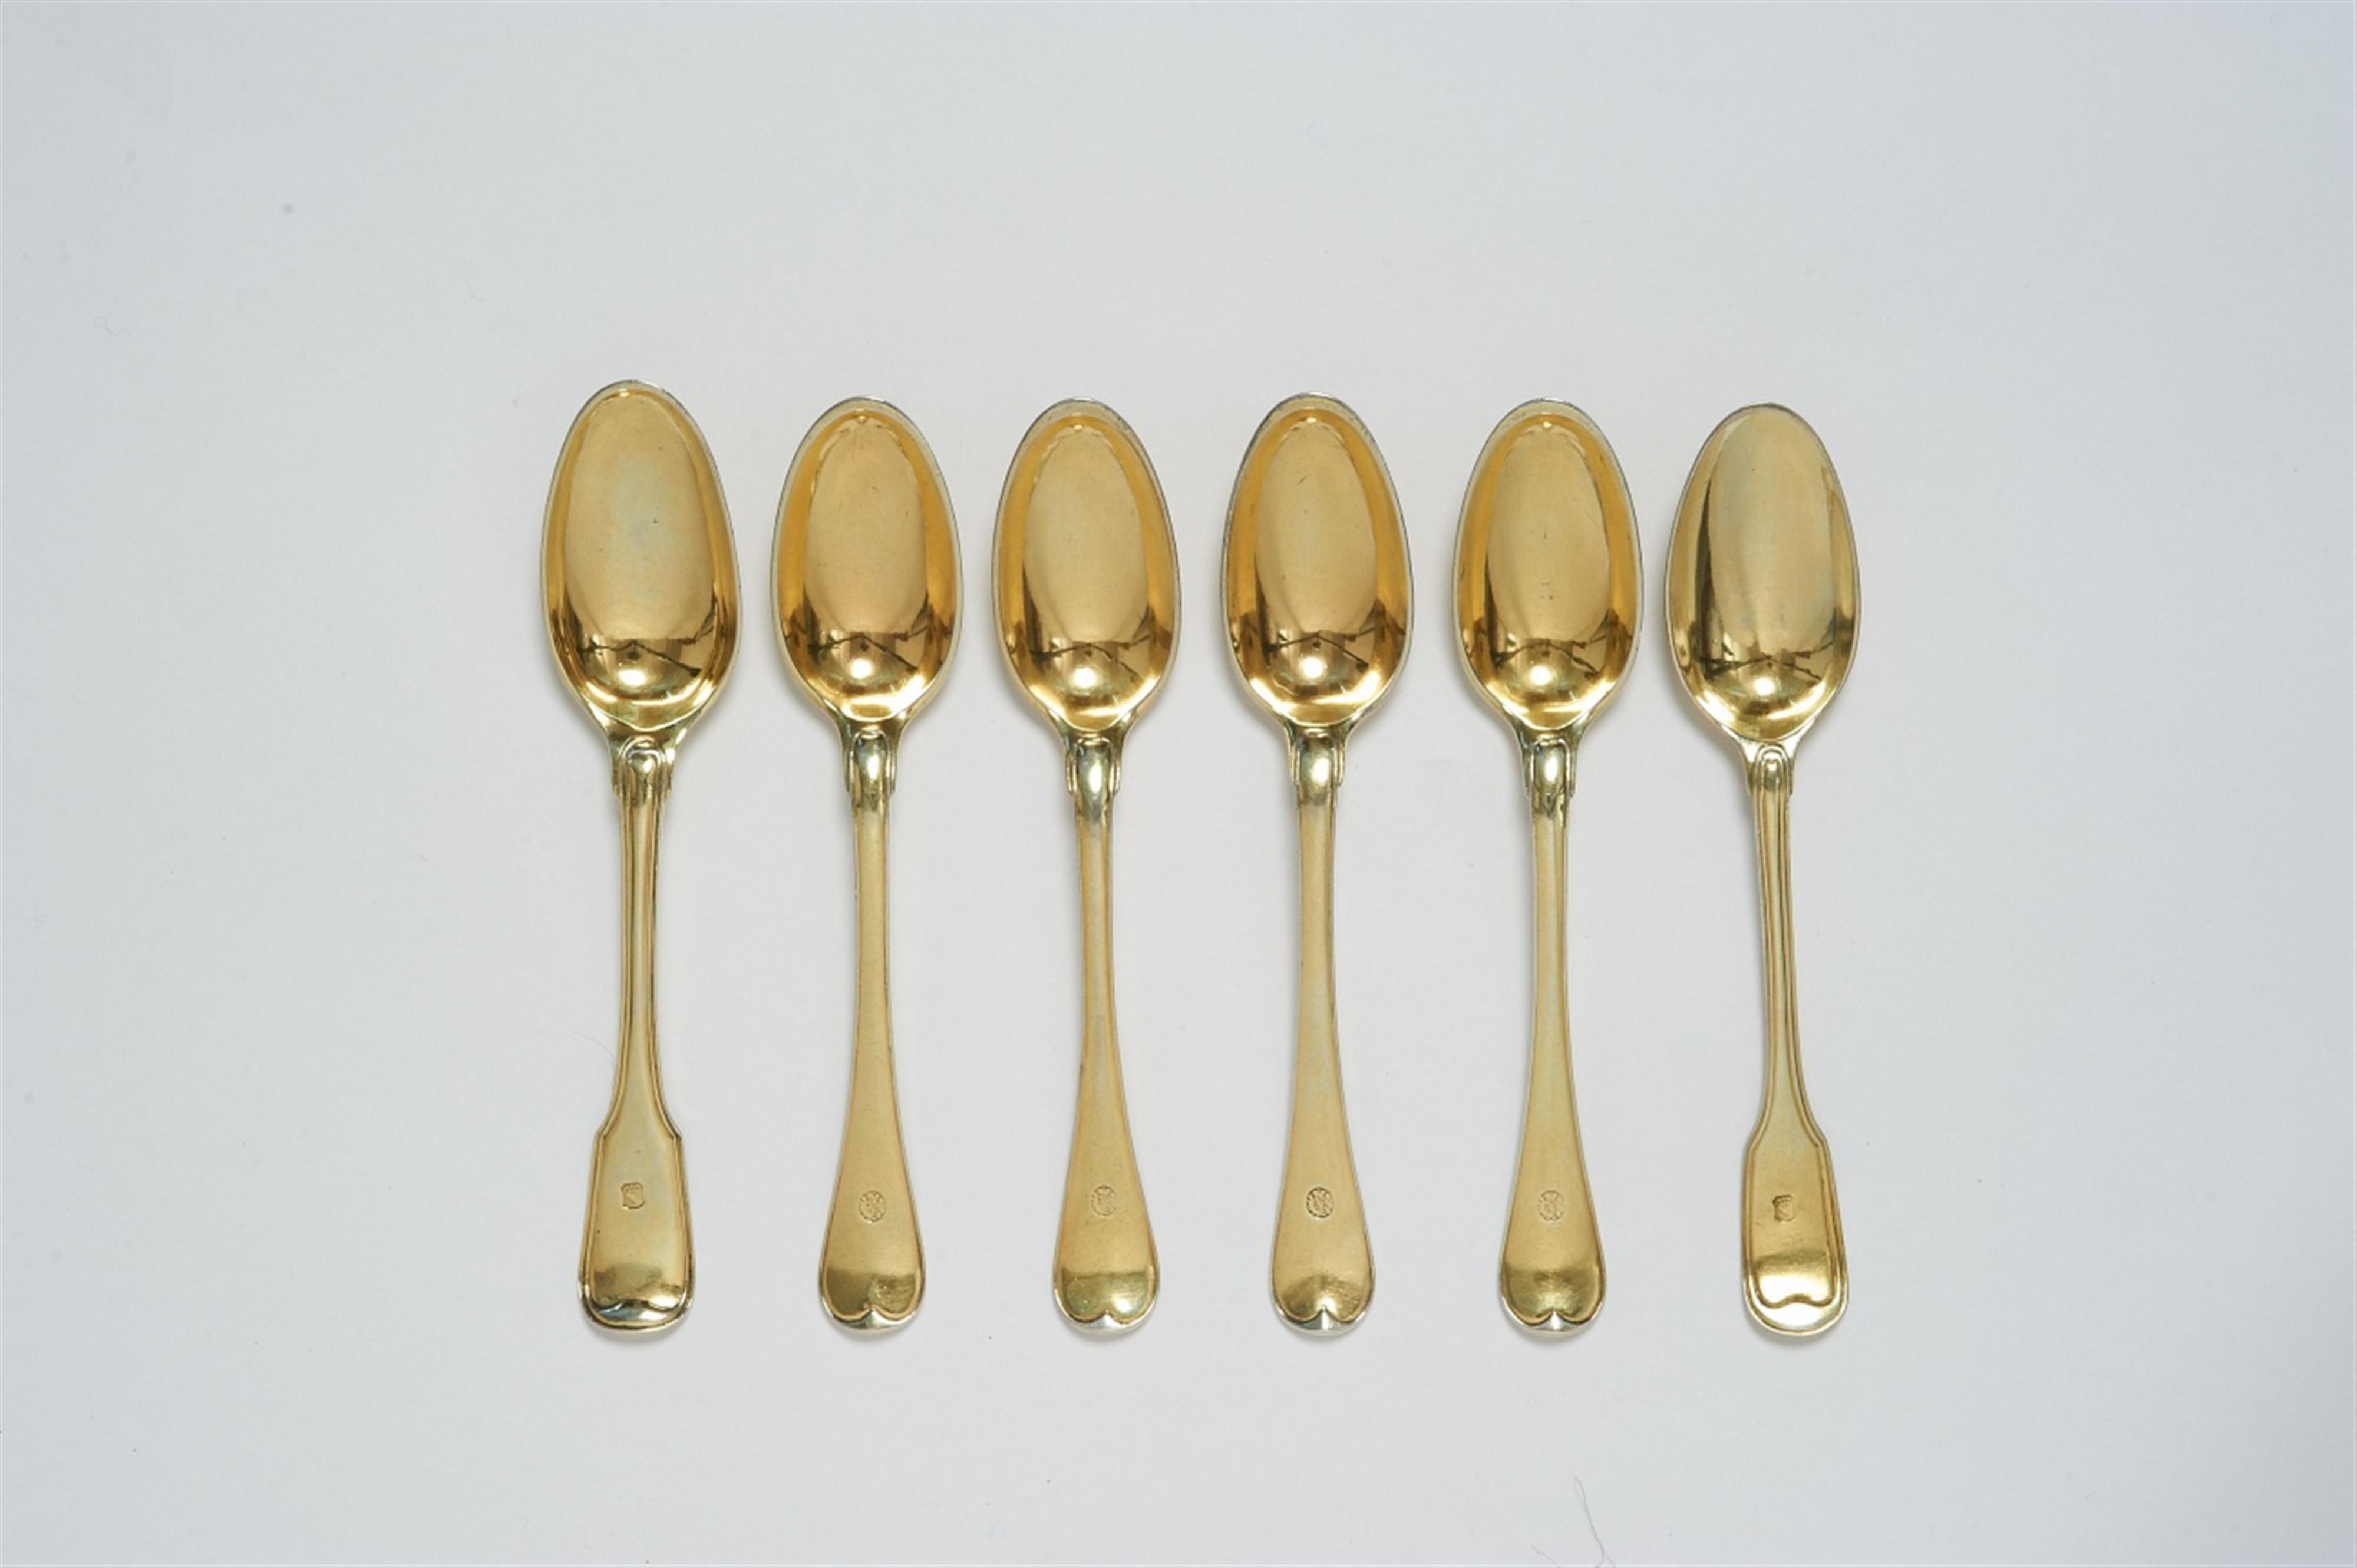 A set of six silver gilt spoons made for the Dukes of Anhalt-Dessau. The ends decorated with the arms of Anhalt. Four spoons marked Strassbourg, 1775 with indistinct maker's mark "IMLIN". One marked Augsburg 1773 - 75. One unmarked. - image-1